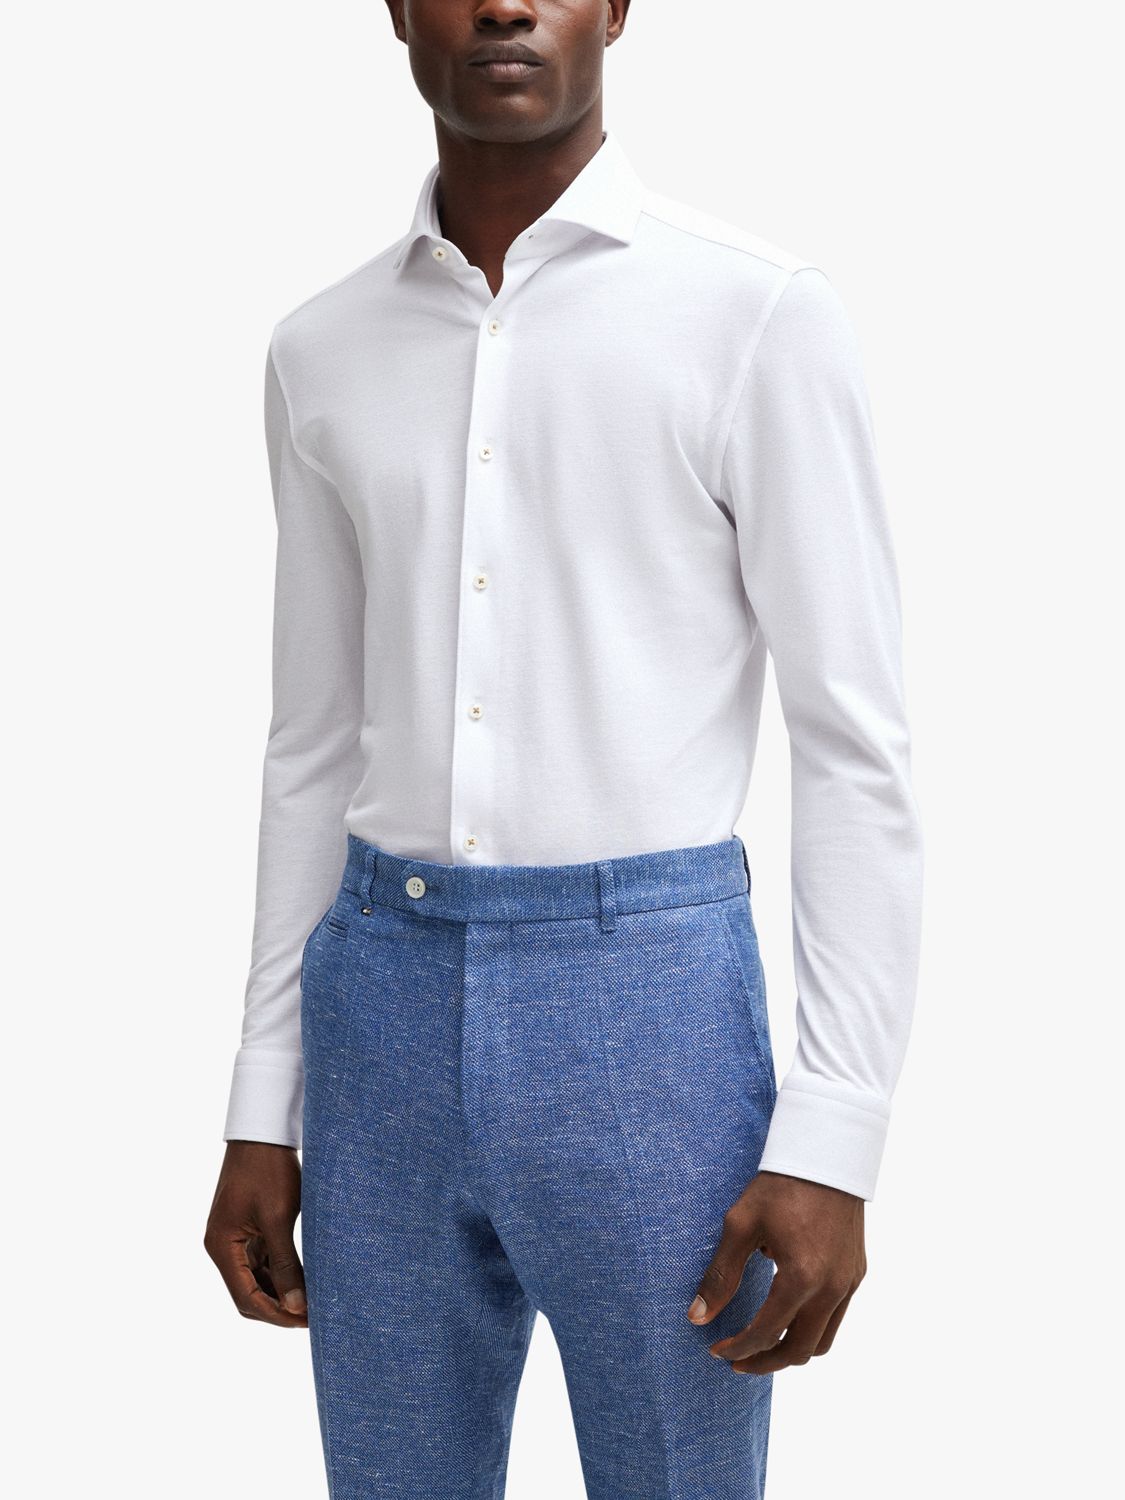 Buy BOSS Casual Fit Long Sleeve Shirt Online at johnlewis.com